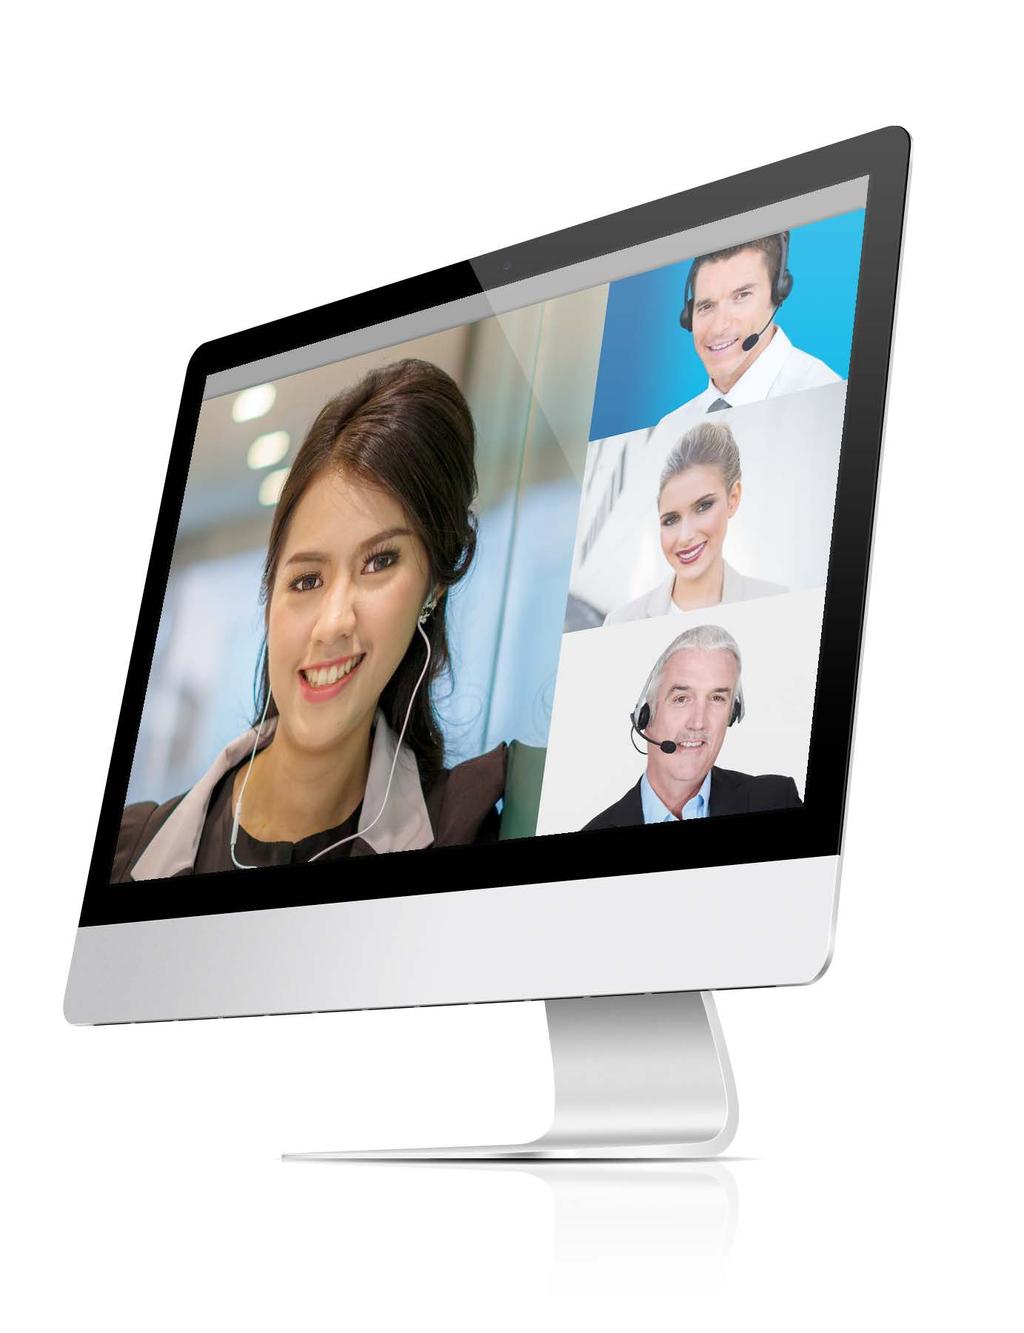 Conclusion: Achieving greater connectivity in an evolving virtual marketplace 15 [Video conferencing] leads to deeper, more effective relationships and more productive meetings and events which, in